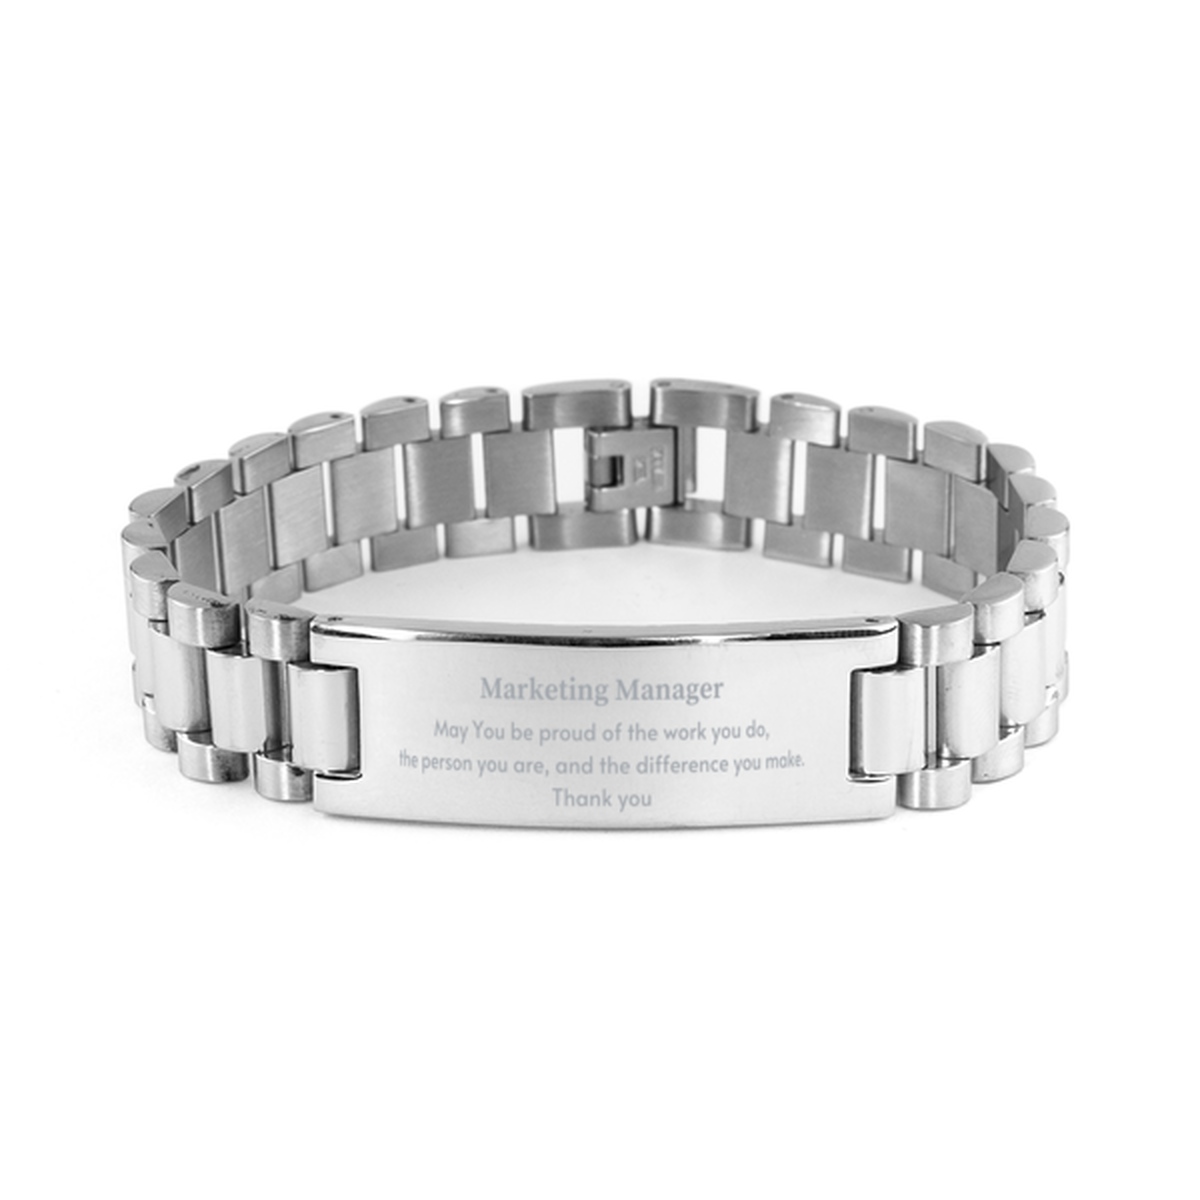 Heartwarming Ladder Stainless Steel Bracelet Retirement Coworkers Gifts for Marketing Manager, Marketing Manager May You be proud of the work you do, the person you are Gifts for Boss Men Women Friends